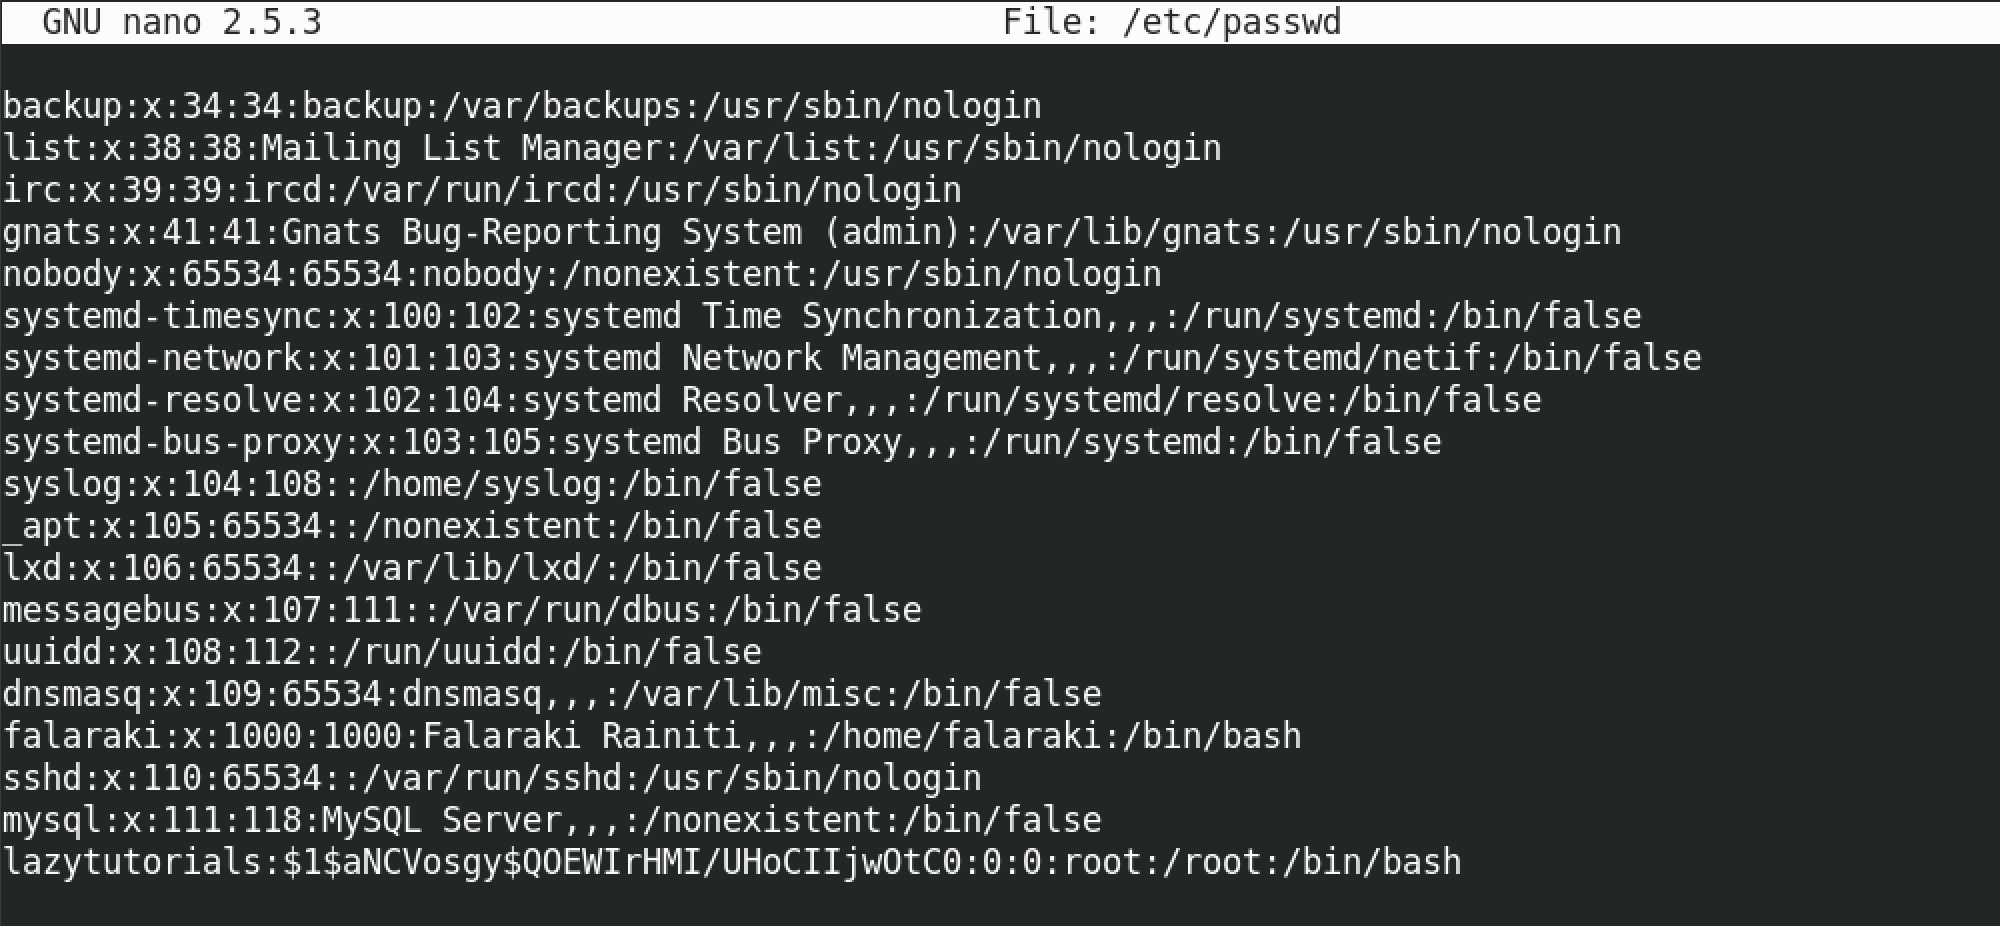 Contents of the /etc/passwd file with the new user added.